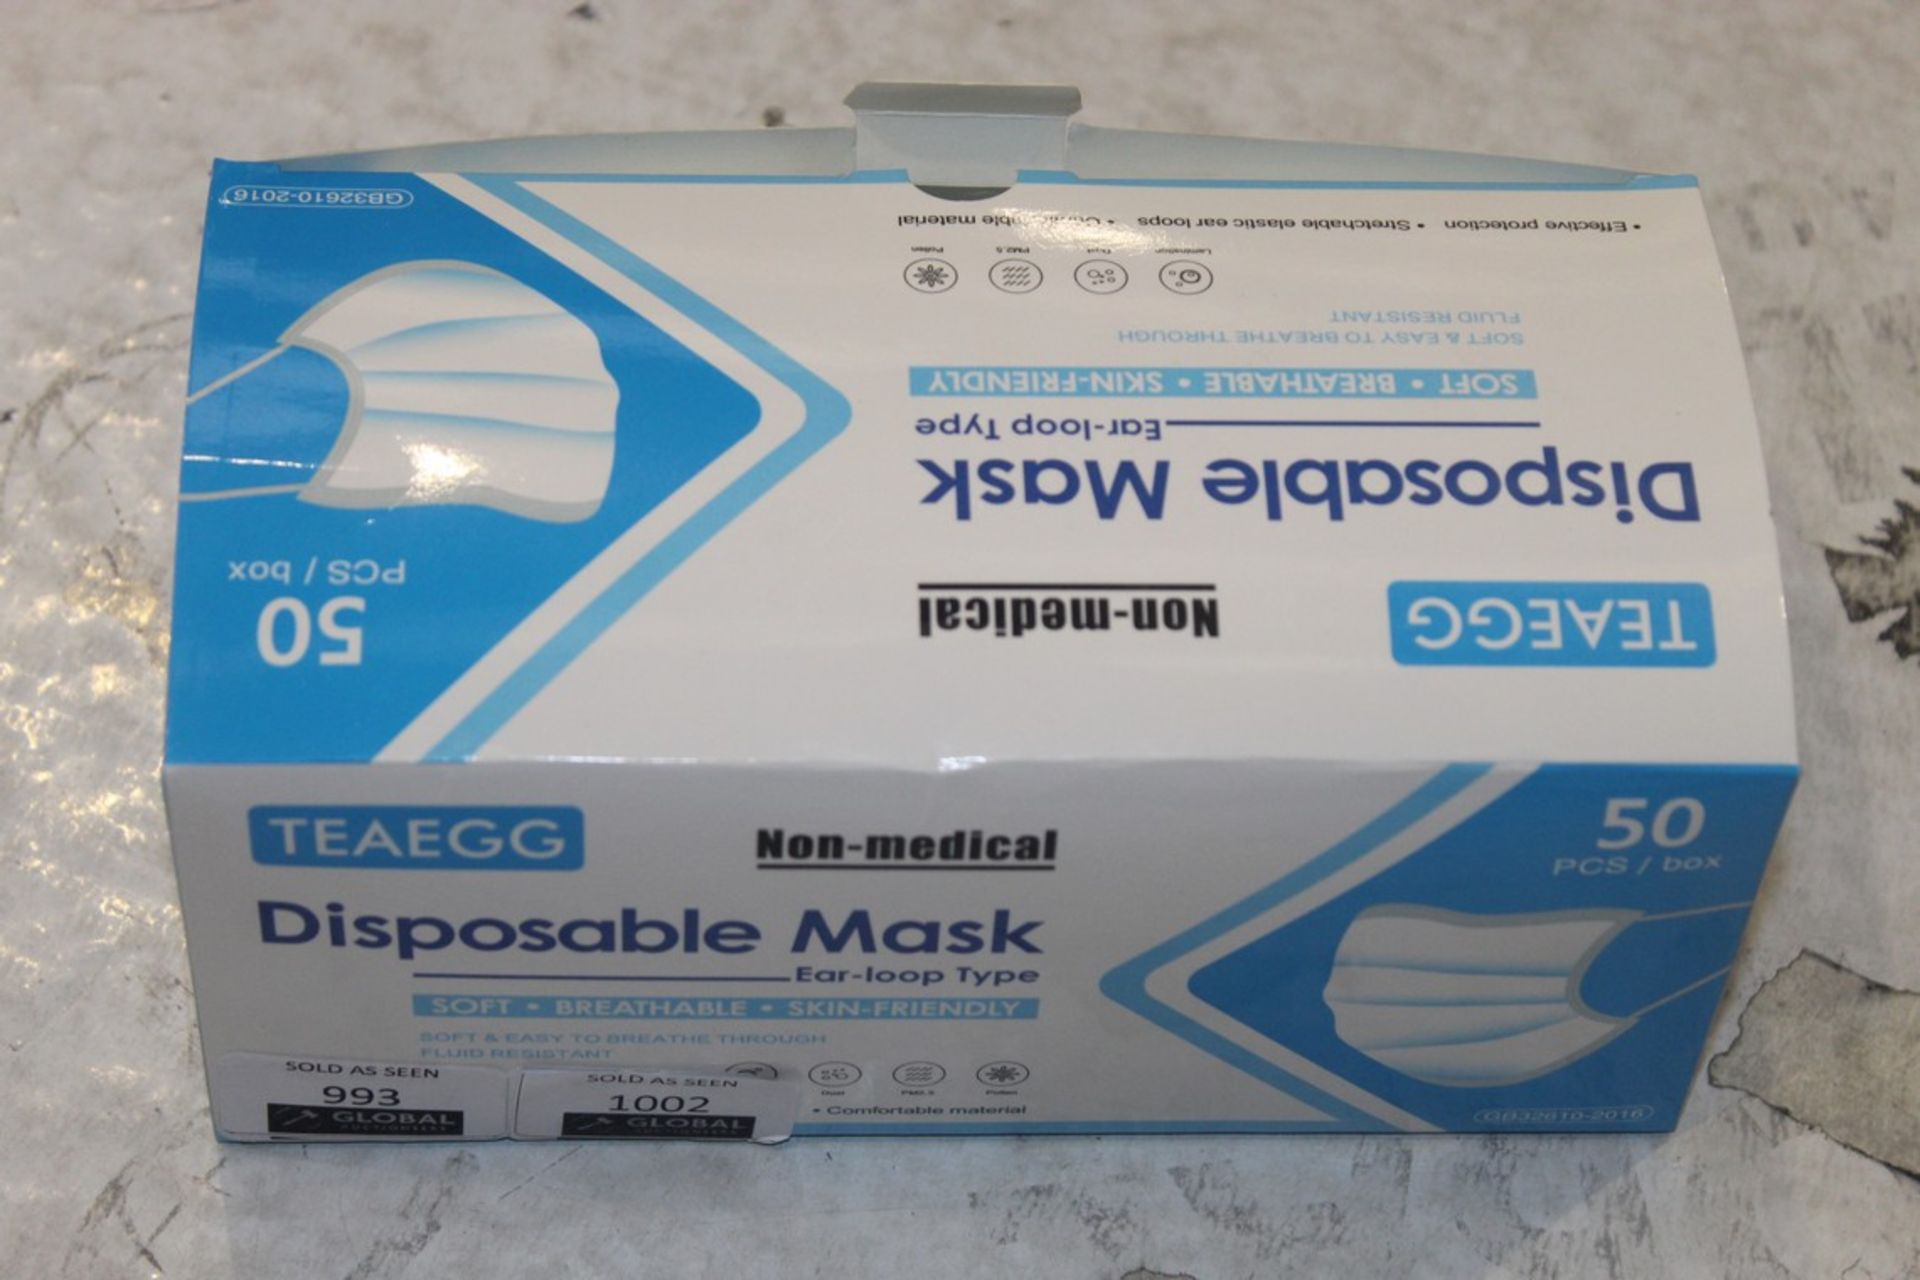 Boxed Of 50 Brand Tea Egg Non Medical Disposable Masks RRP £ (Appraisals Are Available Upon Request)